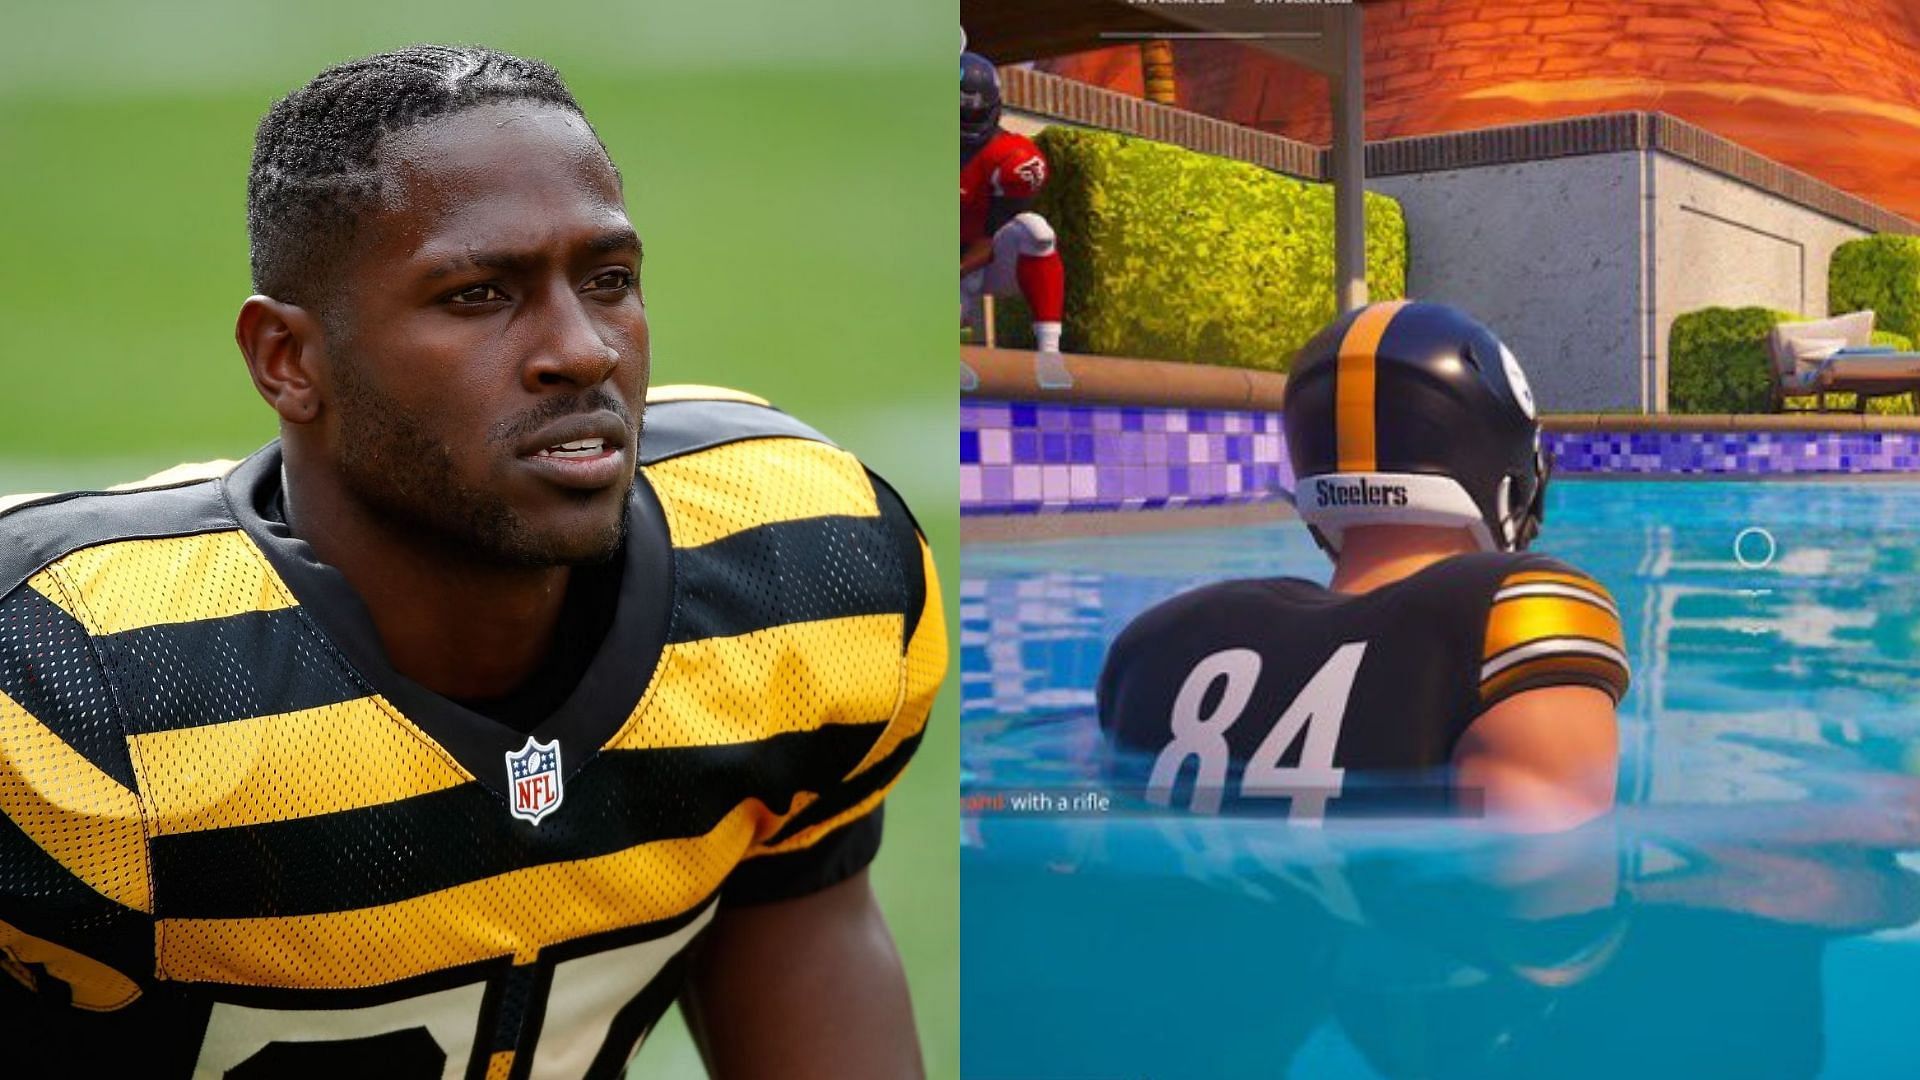 Antonio Brown referencing his indecent exposure incident on Fortnite